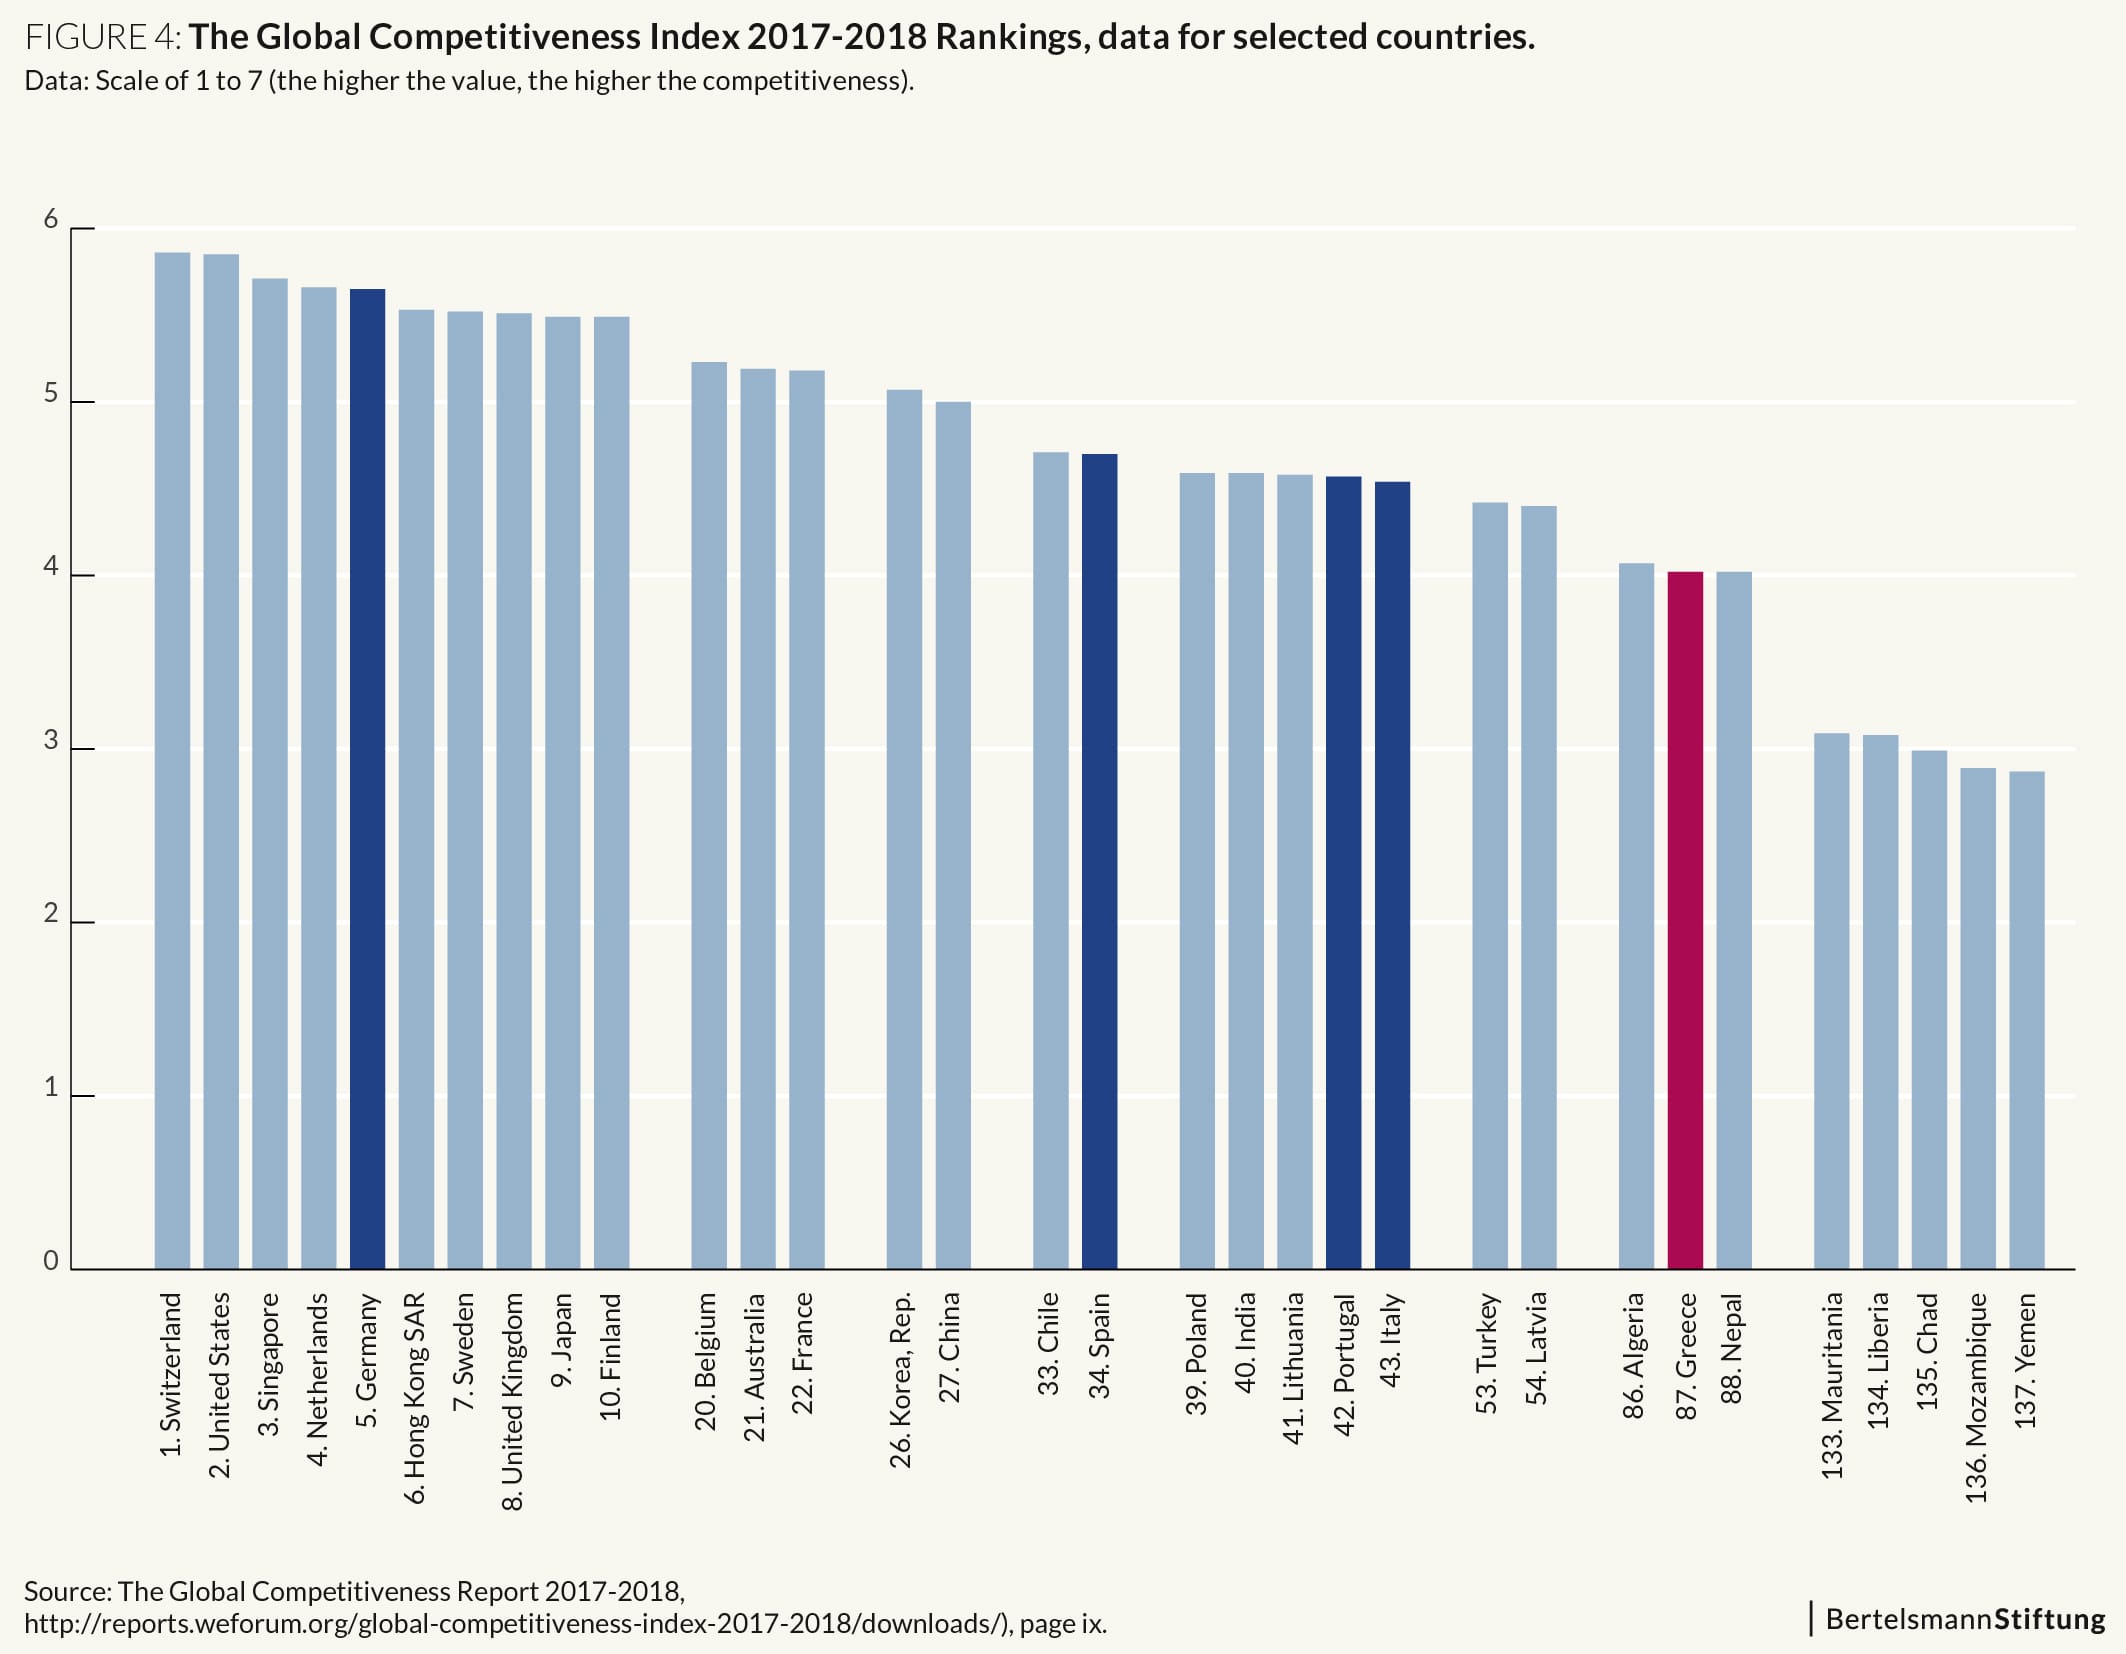 The Global Competitiveness Index 2017-2018 Rankings, data for selected countries